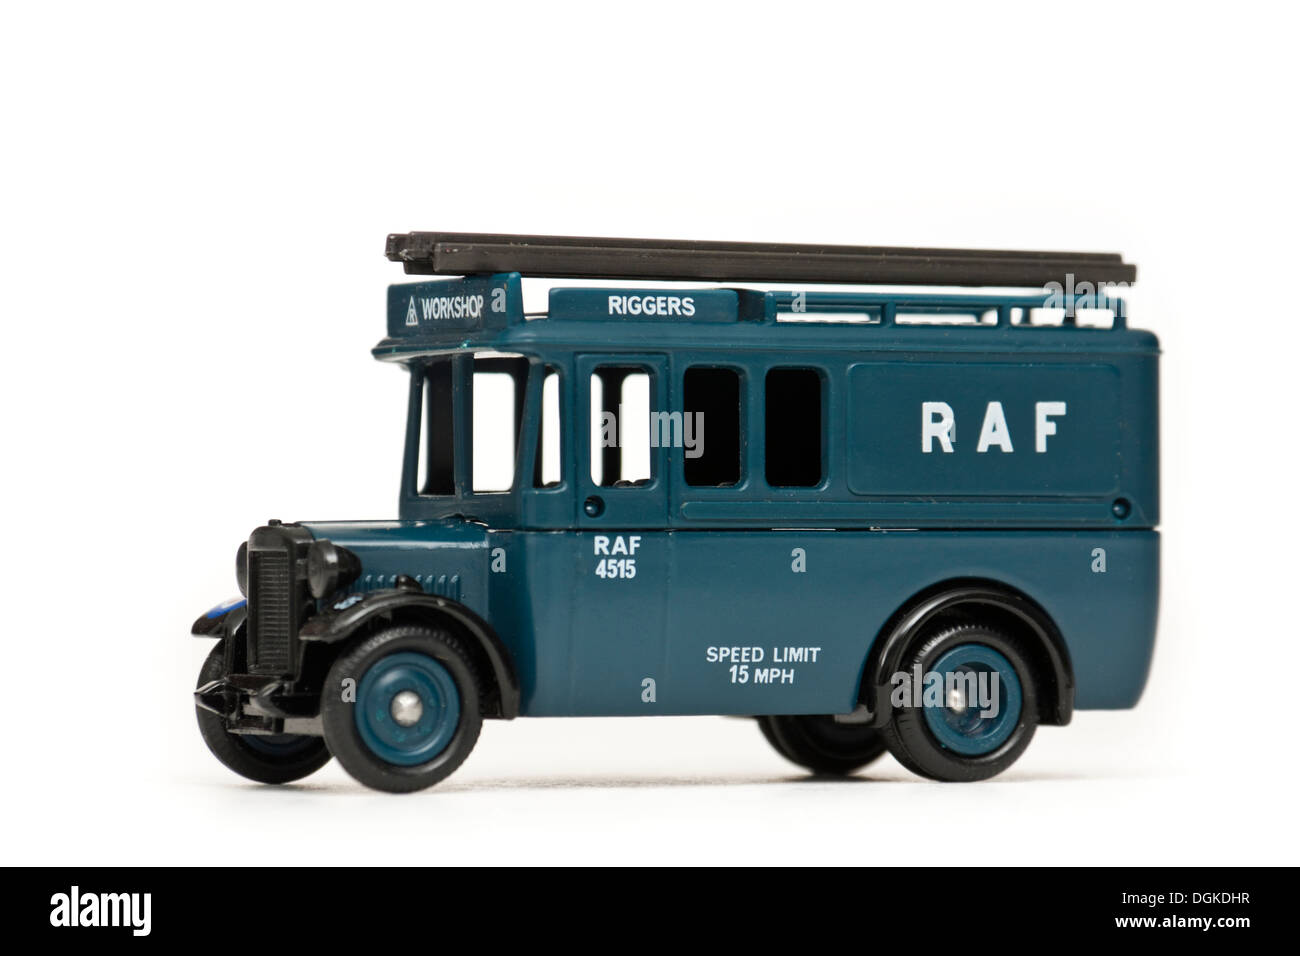 Diecast model replica of vintage Royal Air Force (RAF) ground crew support truck Stock Photo